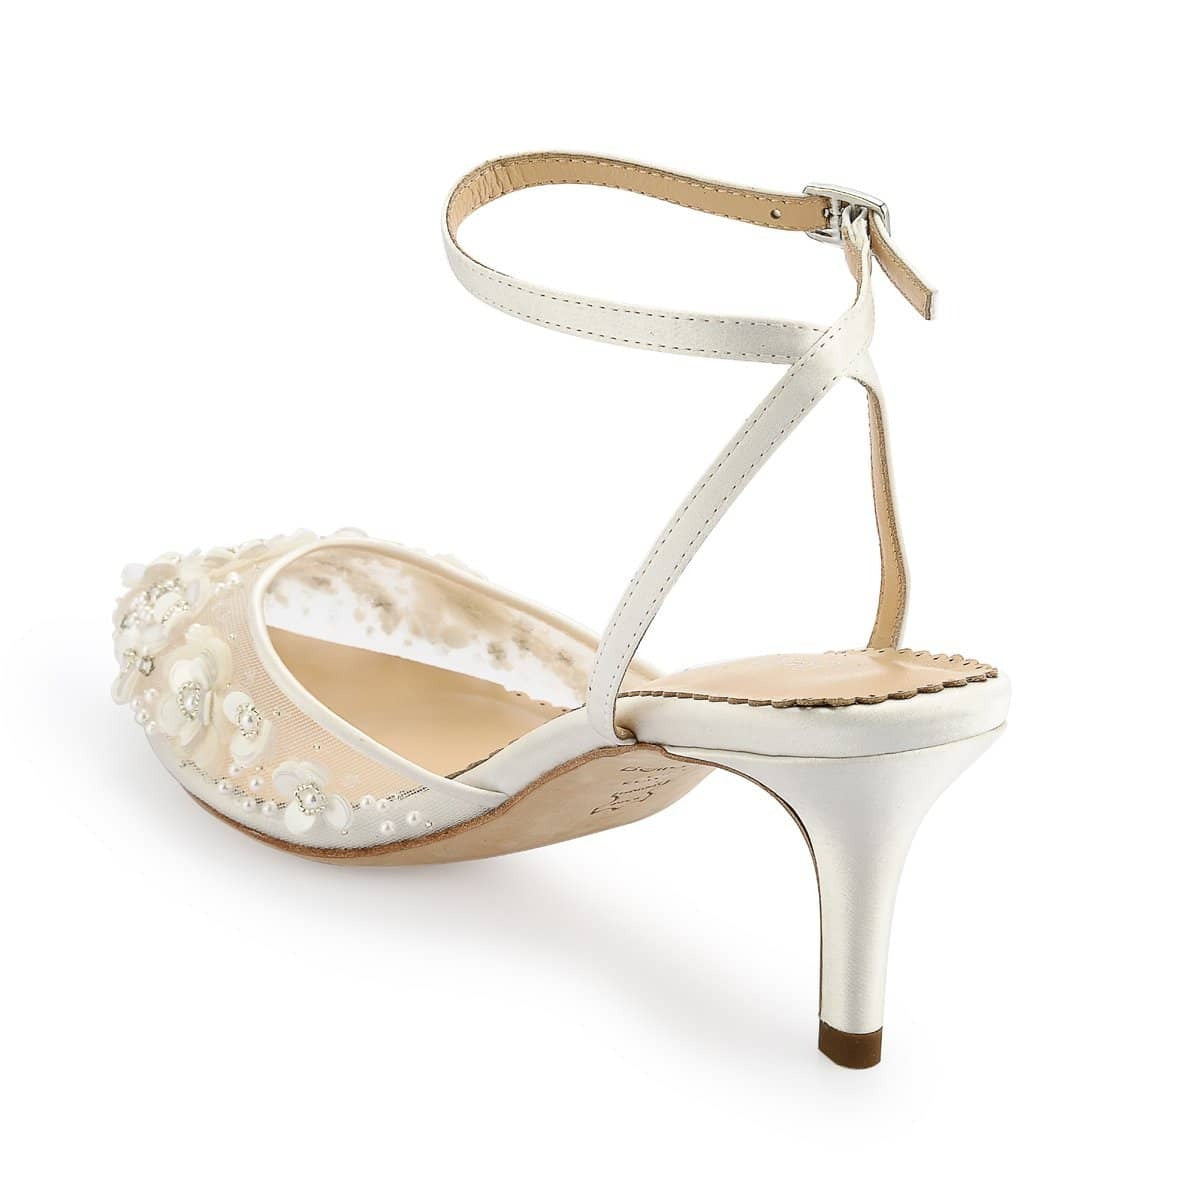 Pretty Wedding Shoes With Kitten Heels | Paisley | Kate Whitcomb Bridal  Shoes – Kate Whitcomb Shoes